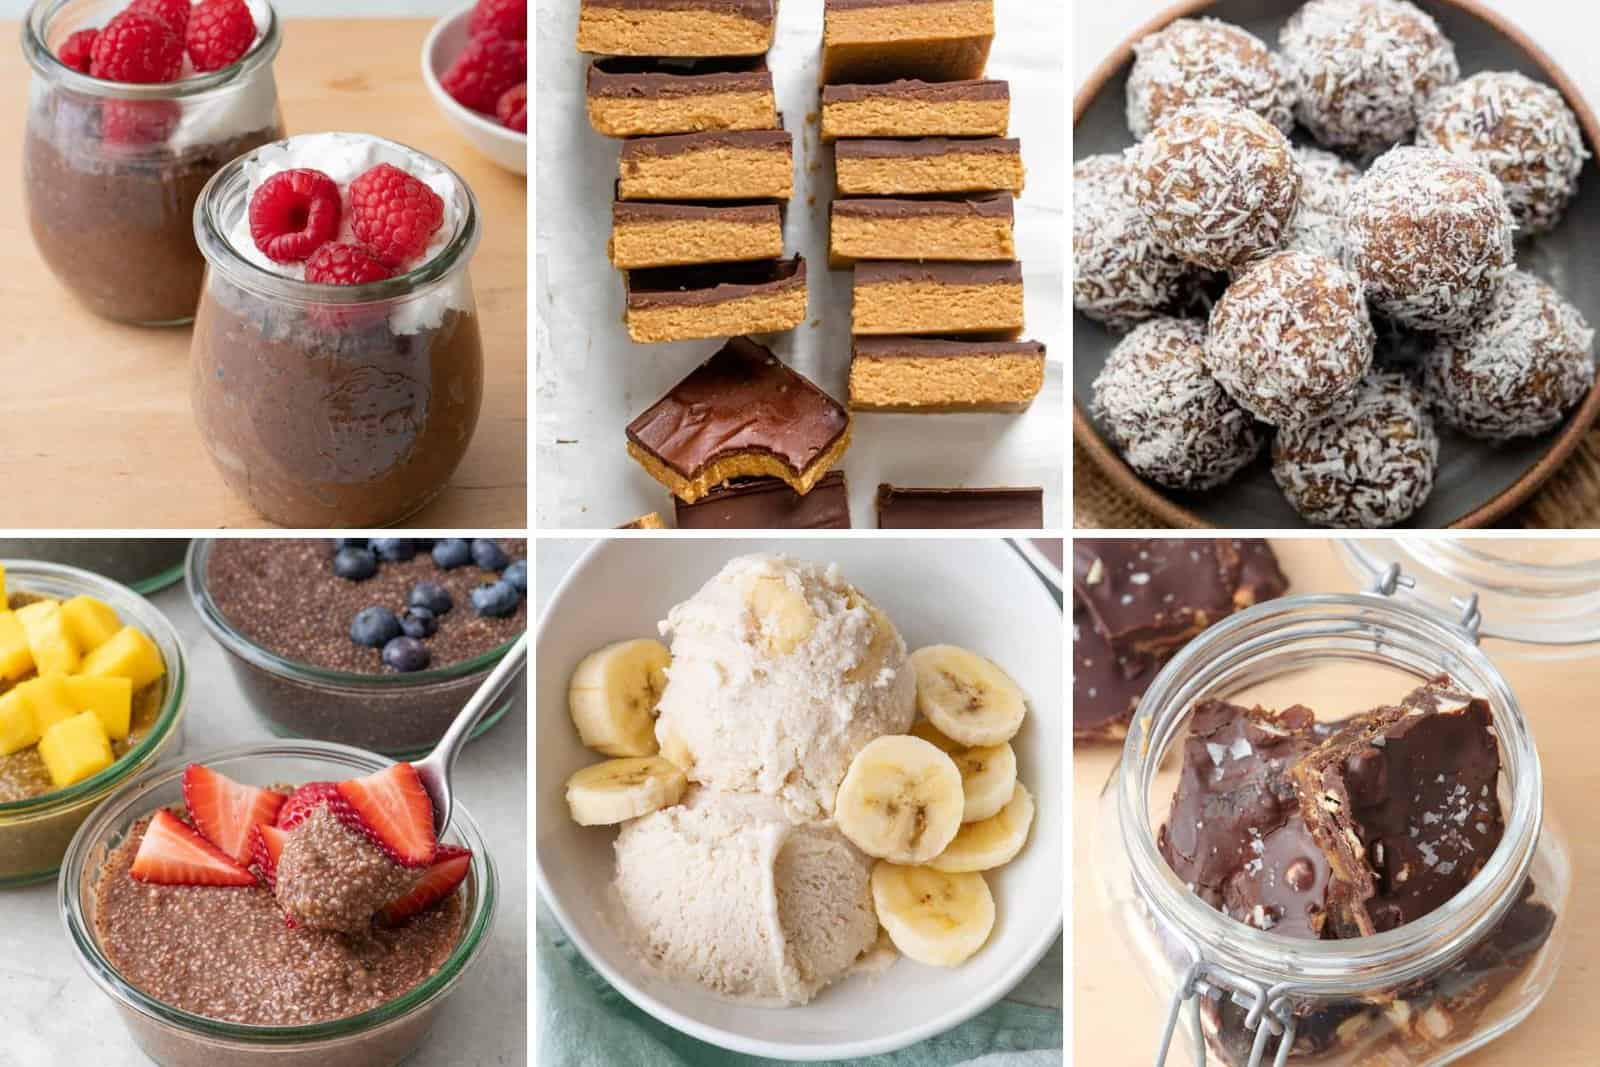 6 image collage of desserts with just a few ingredients.